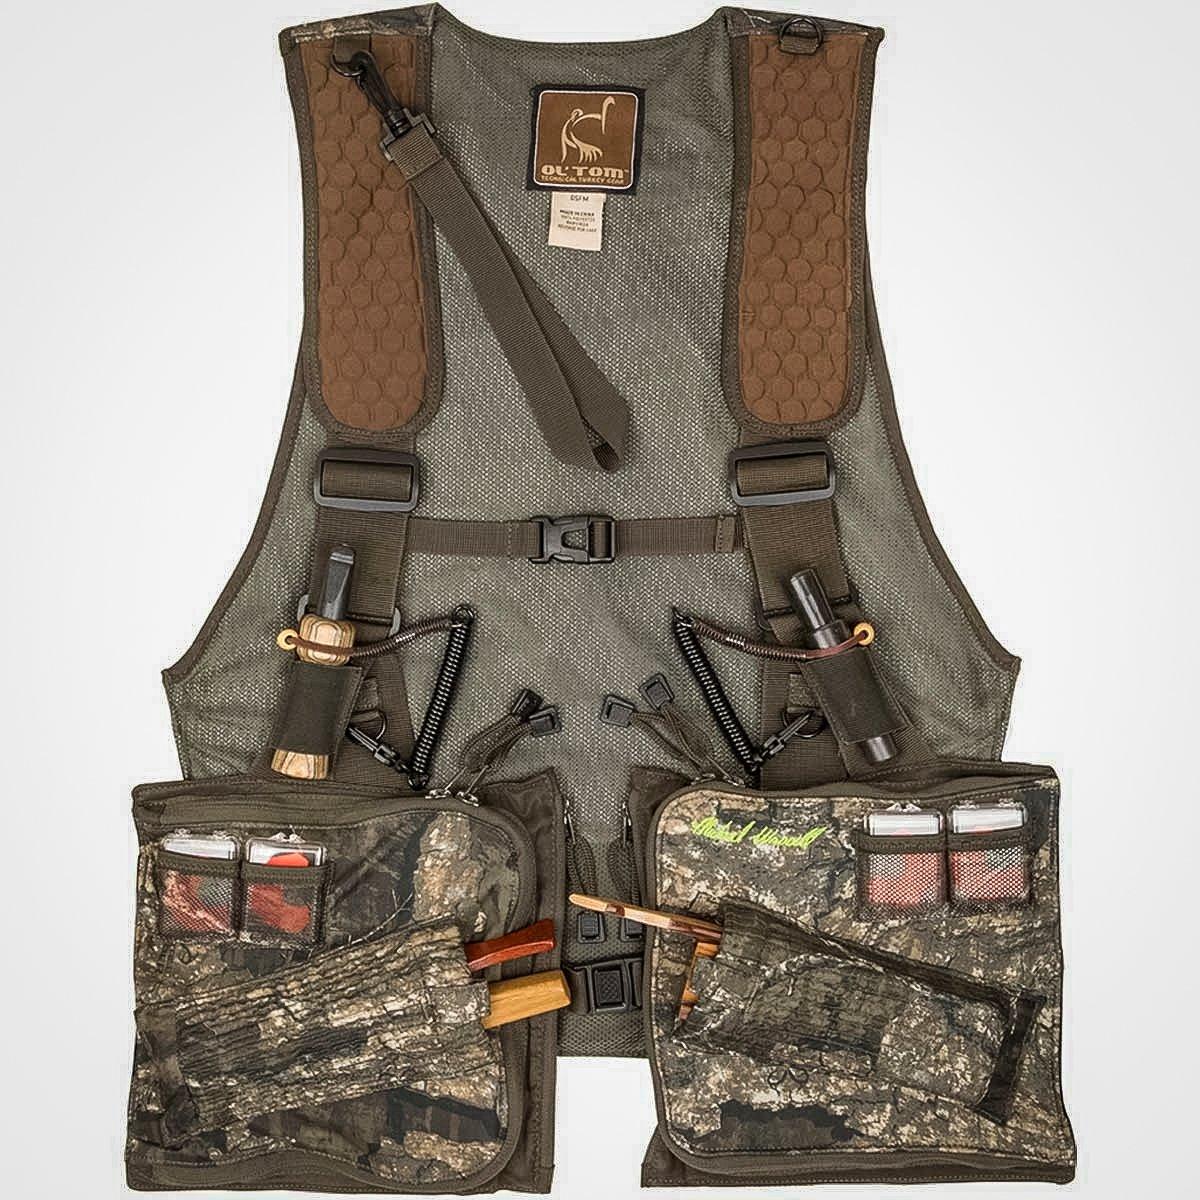 Both Culpepper and Jordan prefer this Michael Waddell Signature Series Time & Motion Strap Vest 2.0 (Ol' Tom courtesy photo)